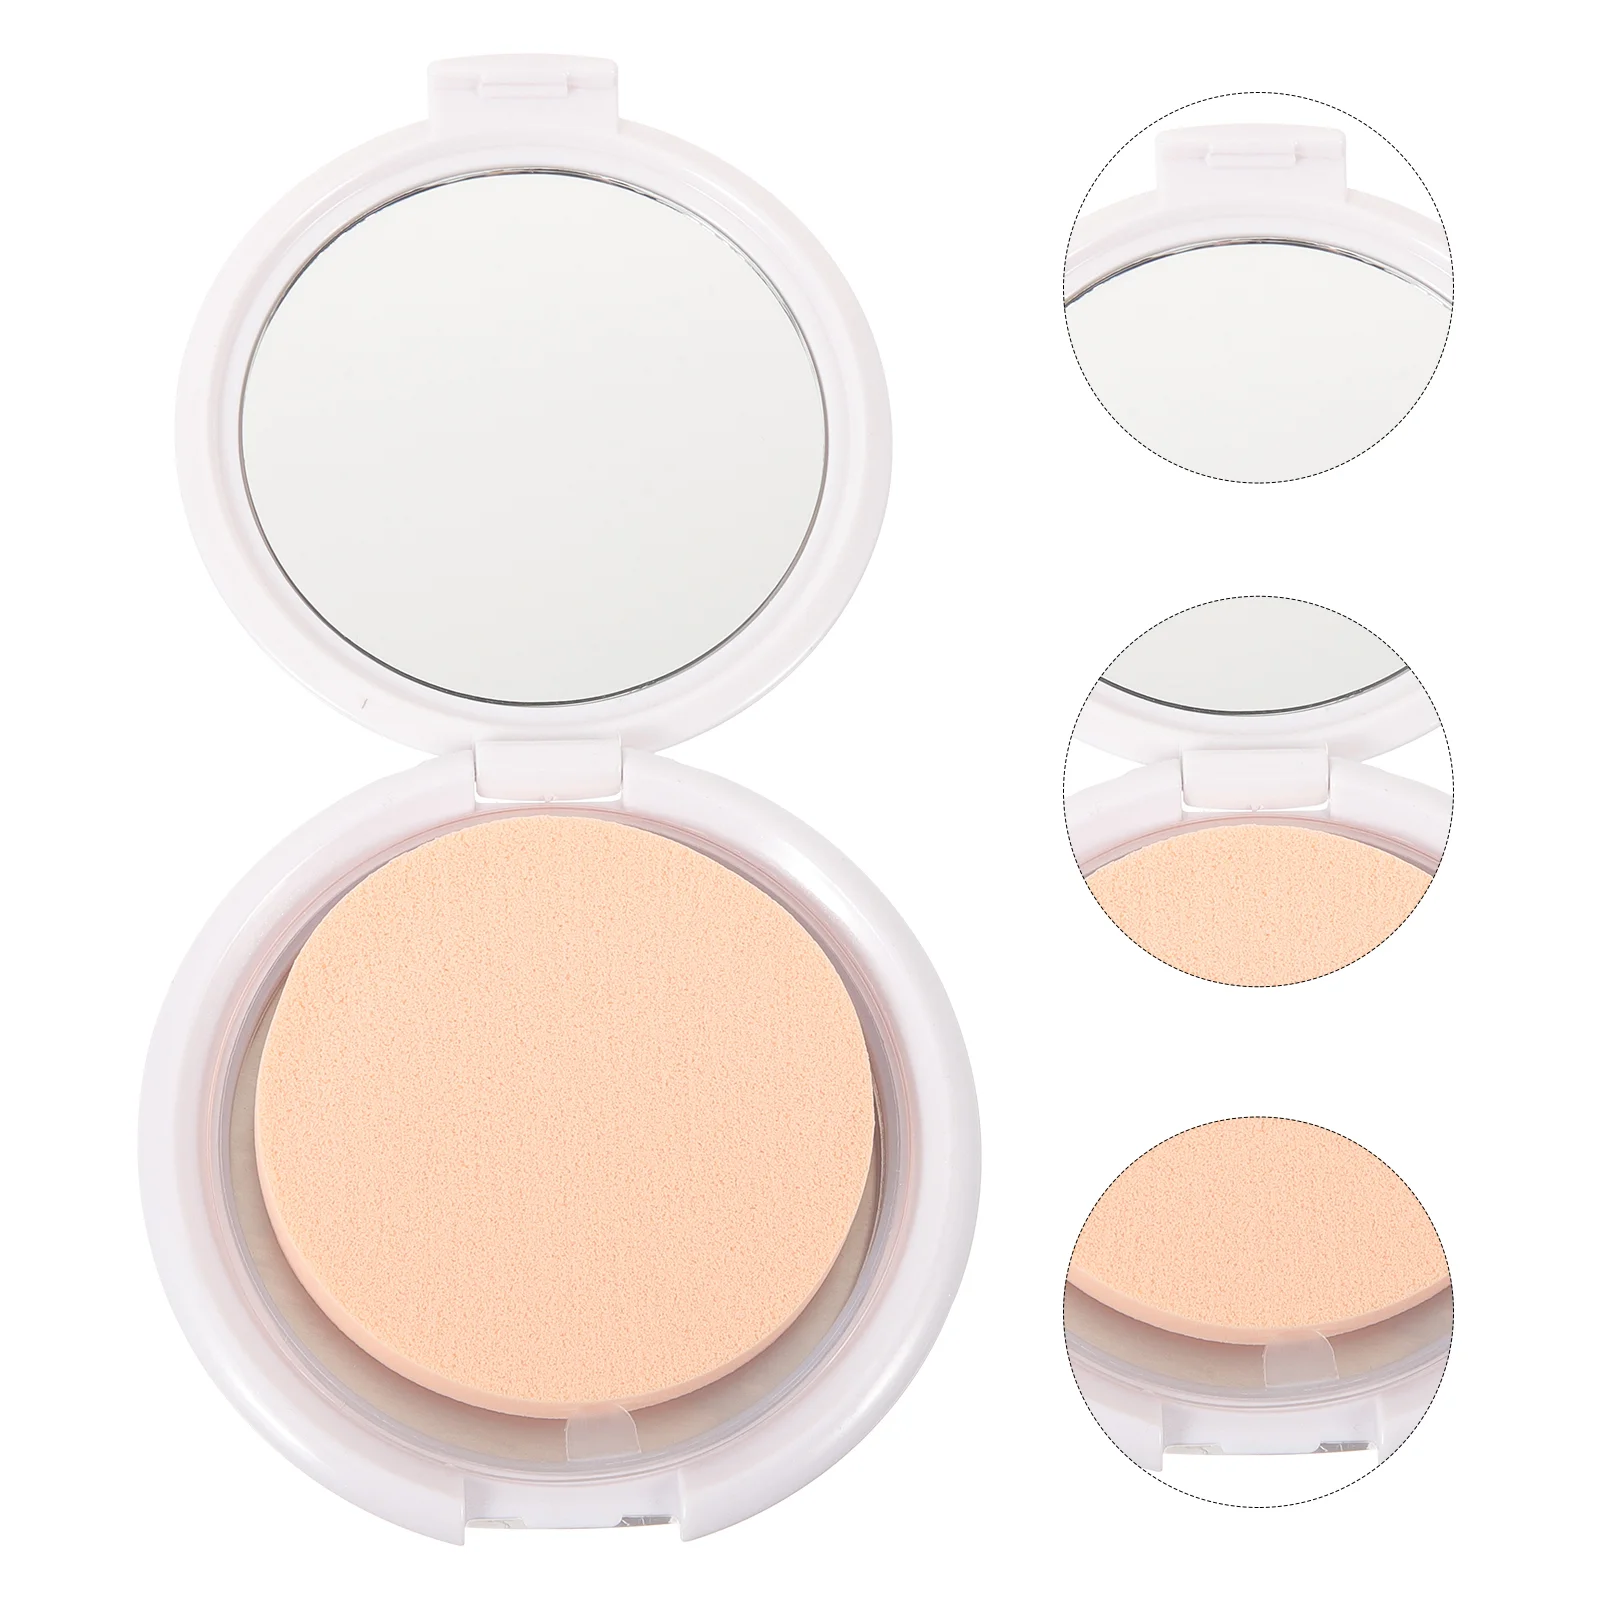 

2 Pcs Toiletry Containers Liquid Foundation Cream Travel Cushion Case Puff Makeup Empty Compact Sponge Bb